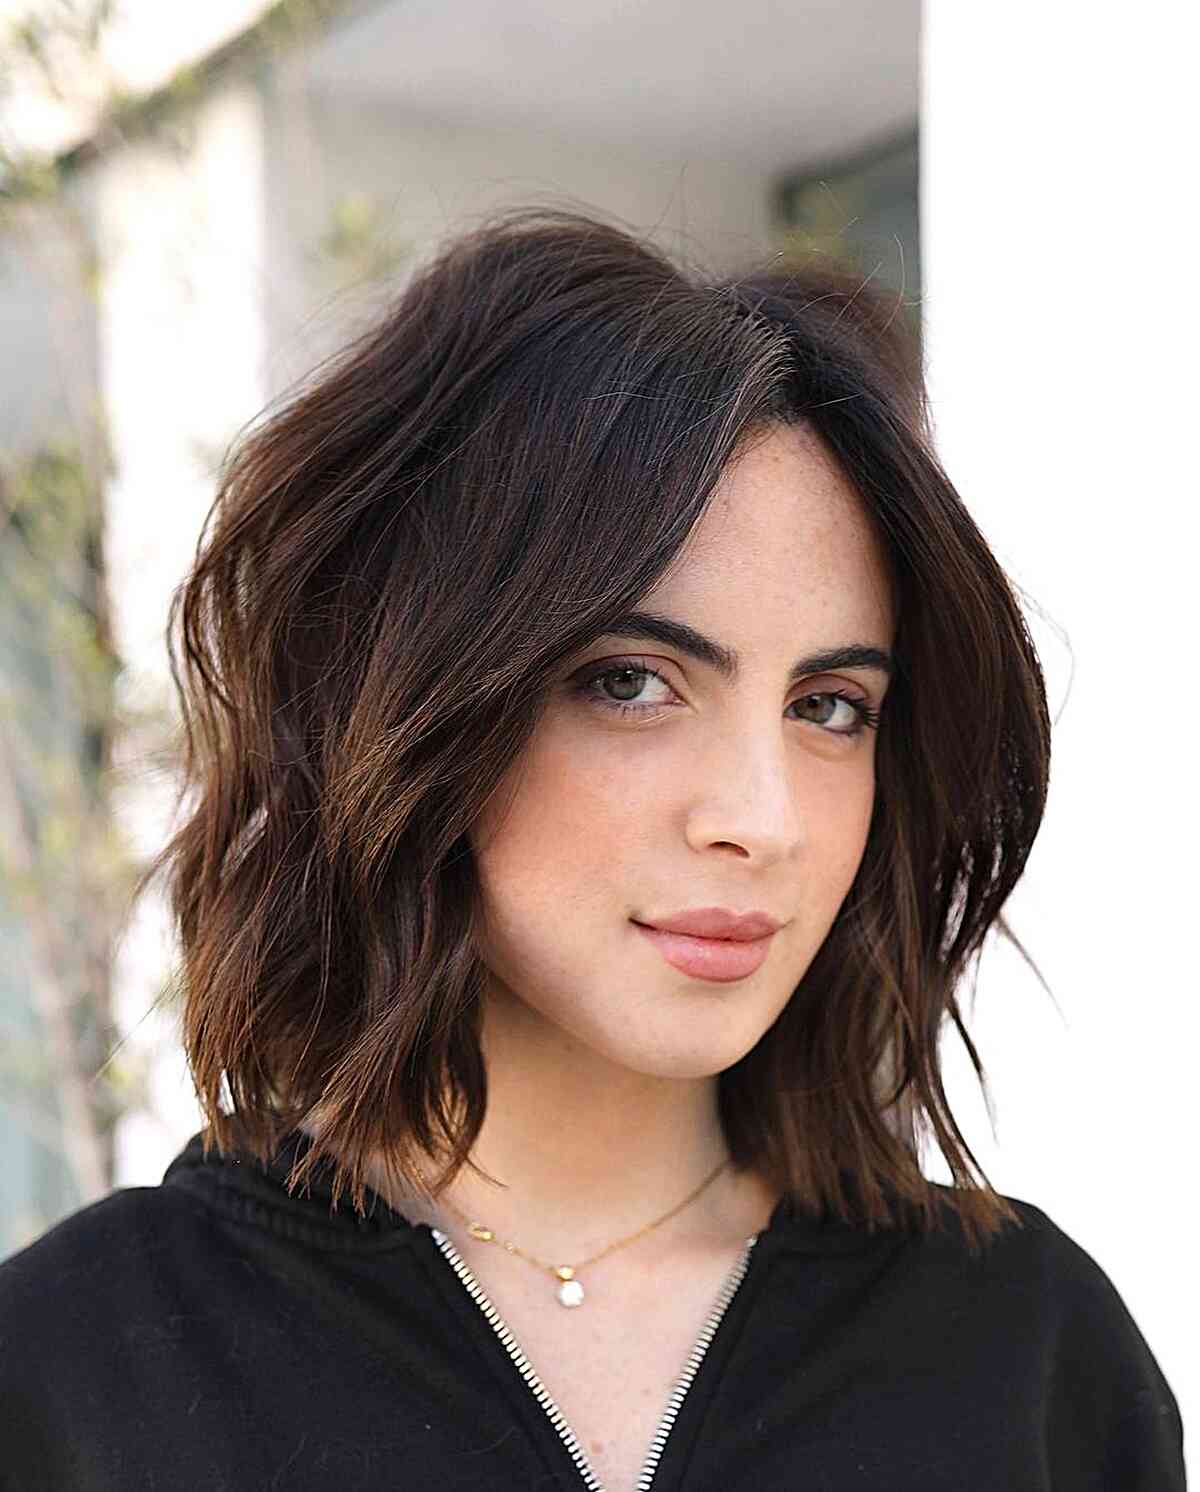 Dark Brown Textured Lob Cut with a Middle Part and no bangs cut at shoulder-length